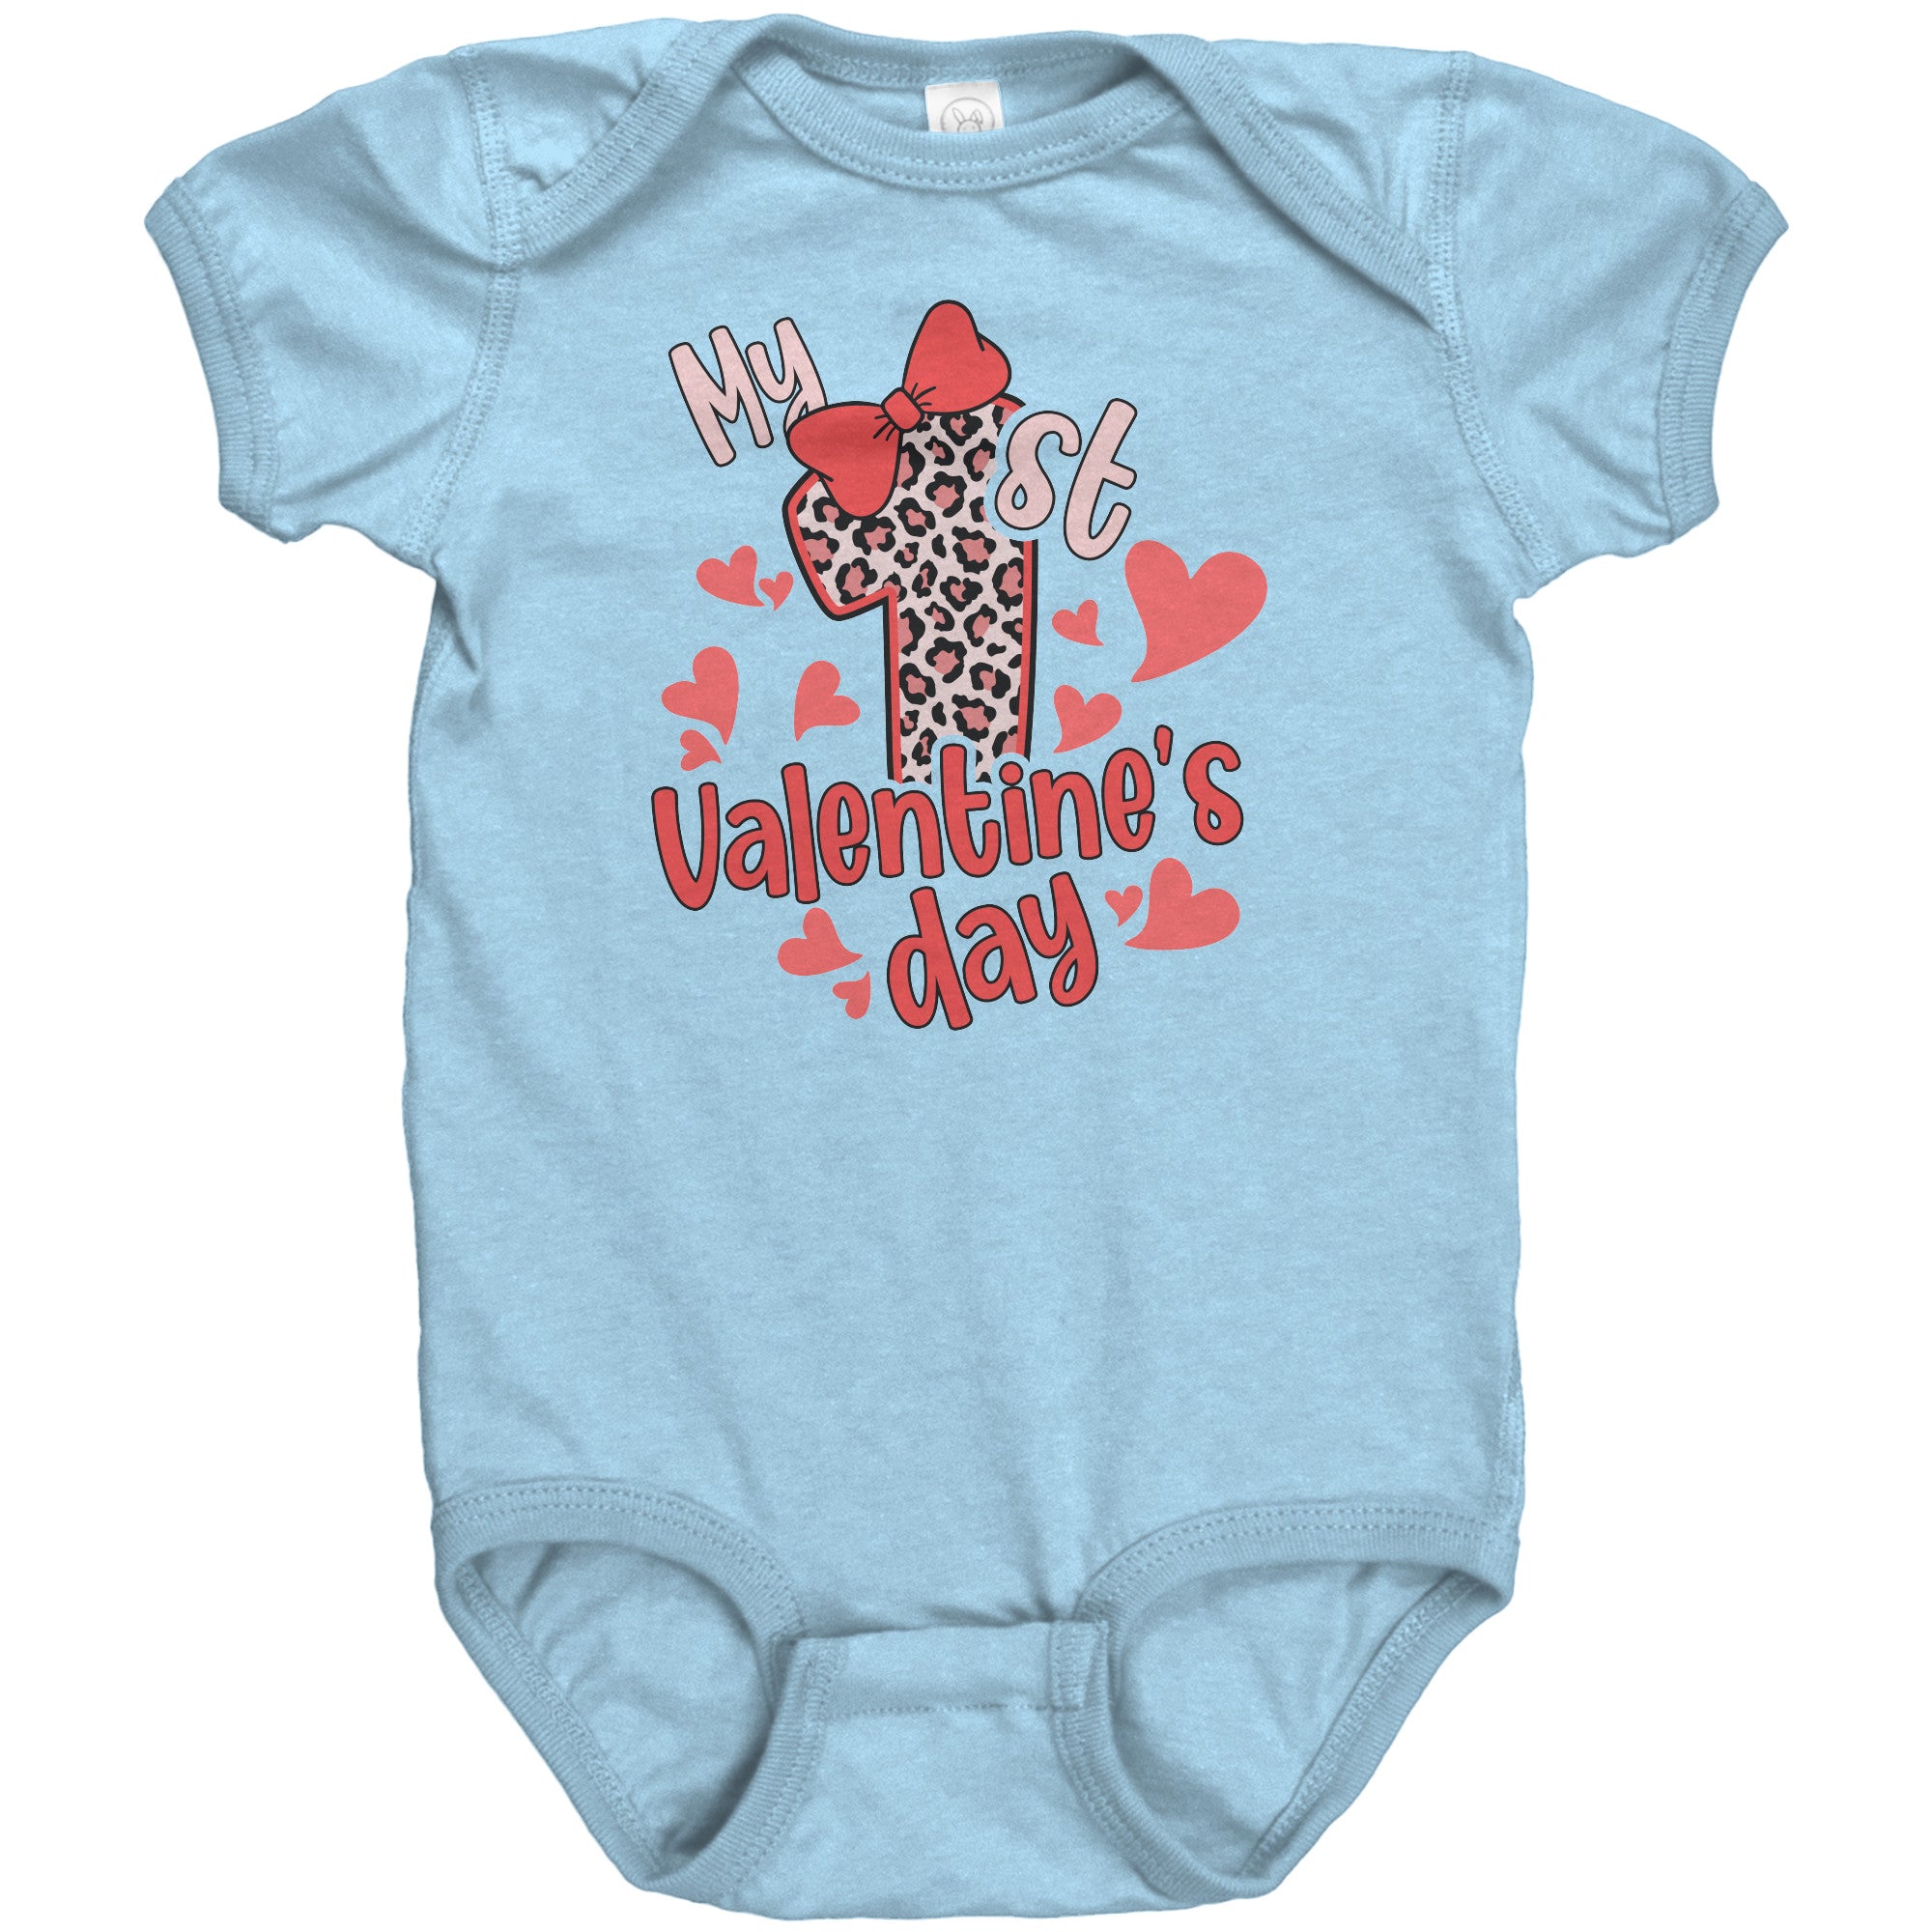 My 1st Valentine's Day Baby Bodysuit and T-shirts